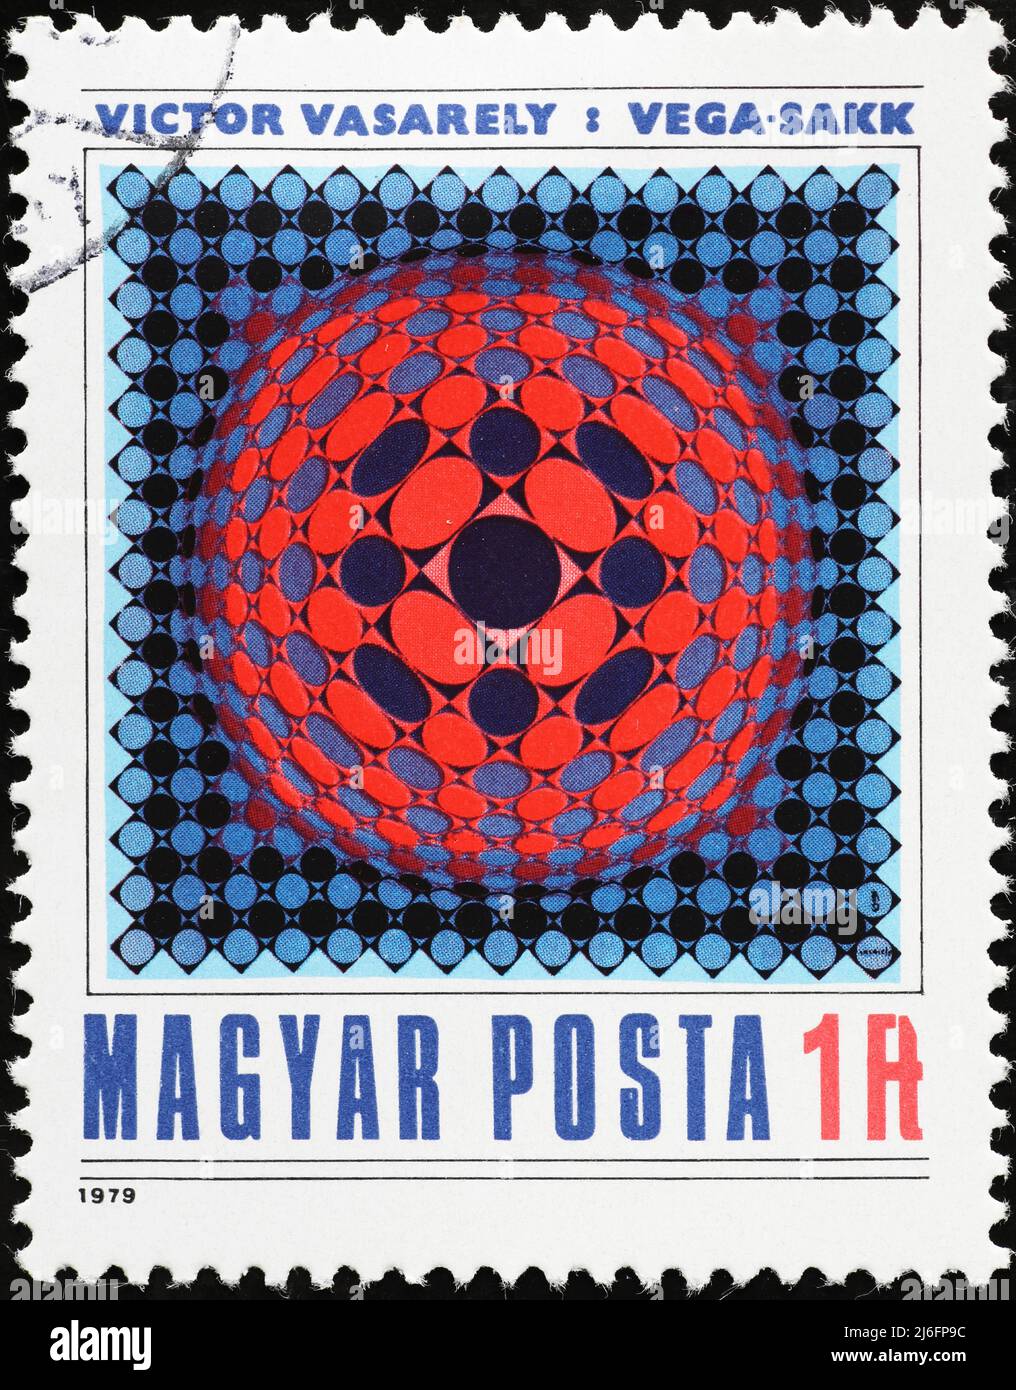 Painting by Victor Vasarely on hungarian stamp Stock Photo